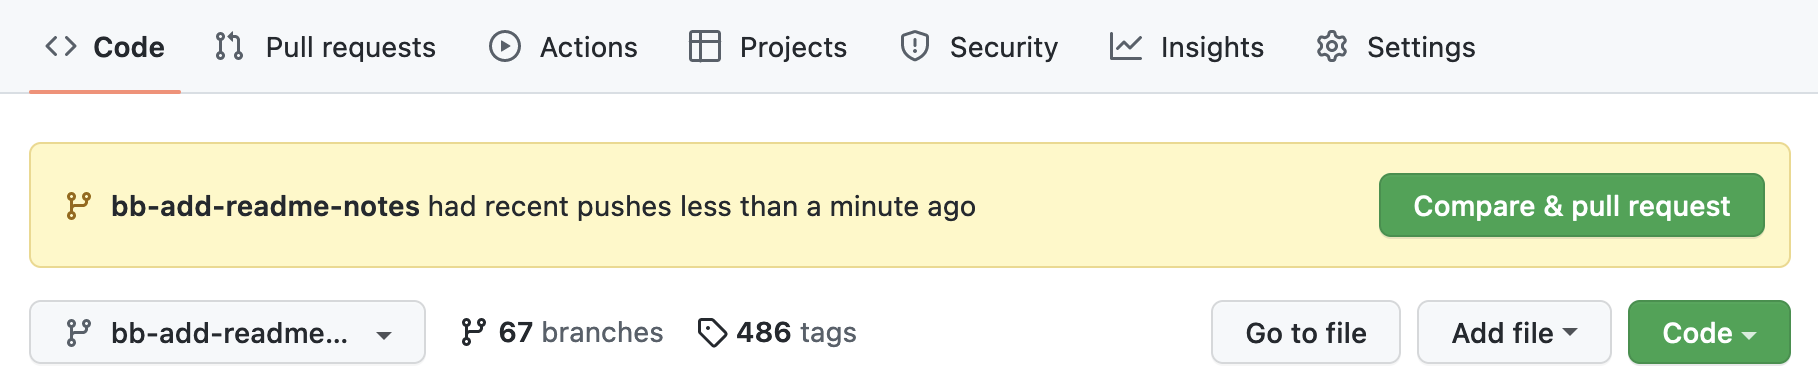 Creating a Pull Request on GitHub